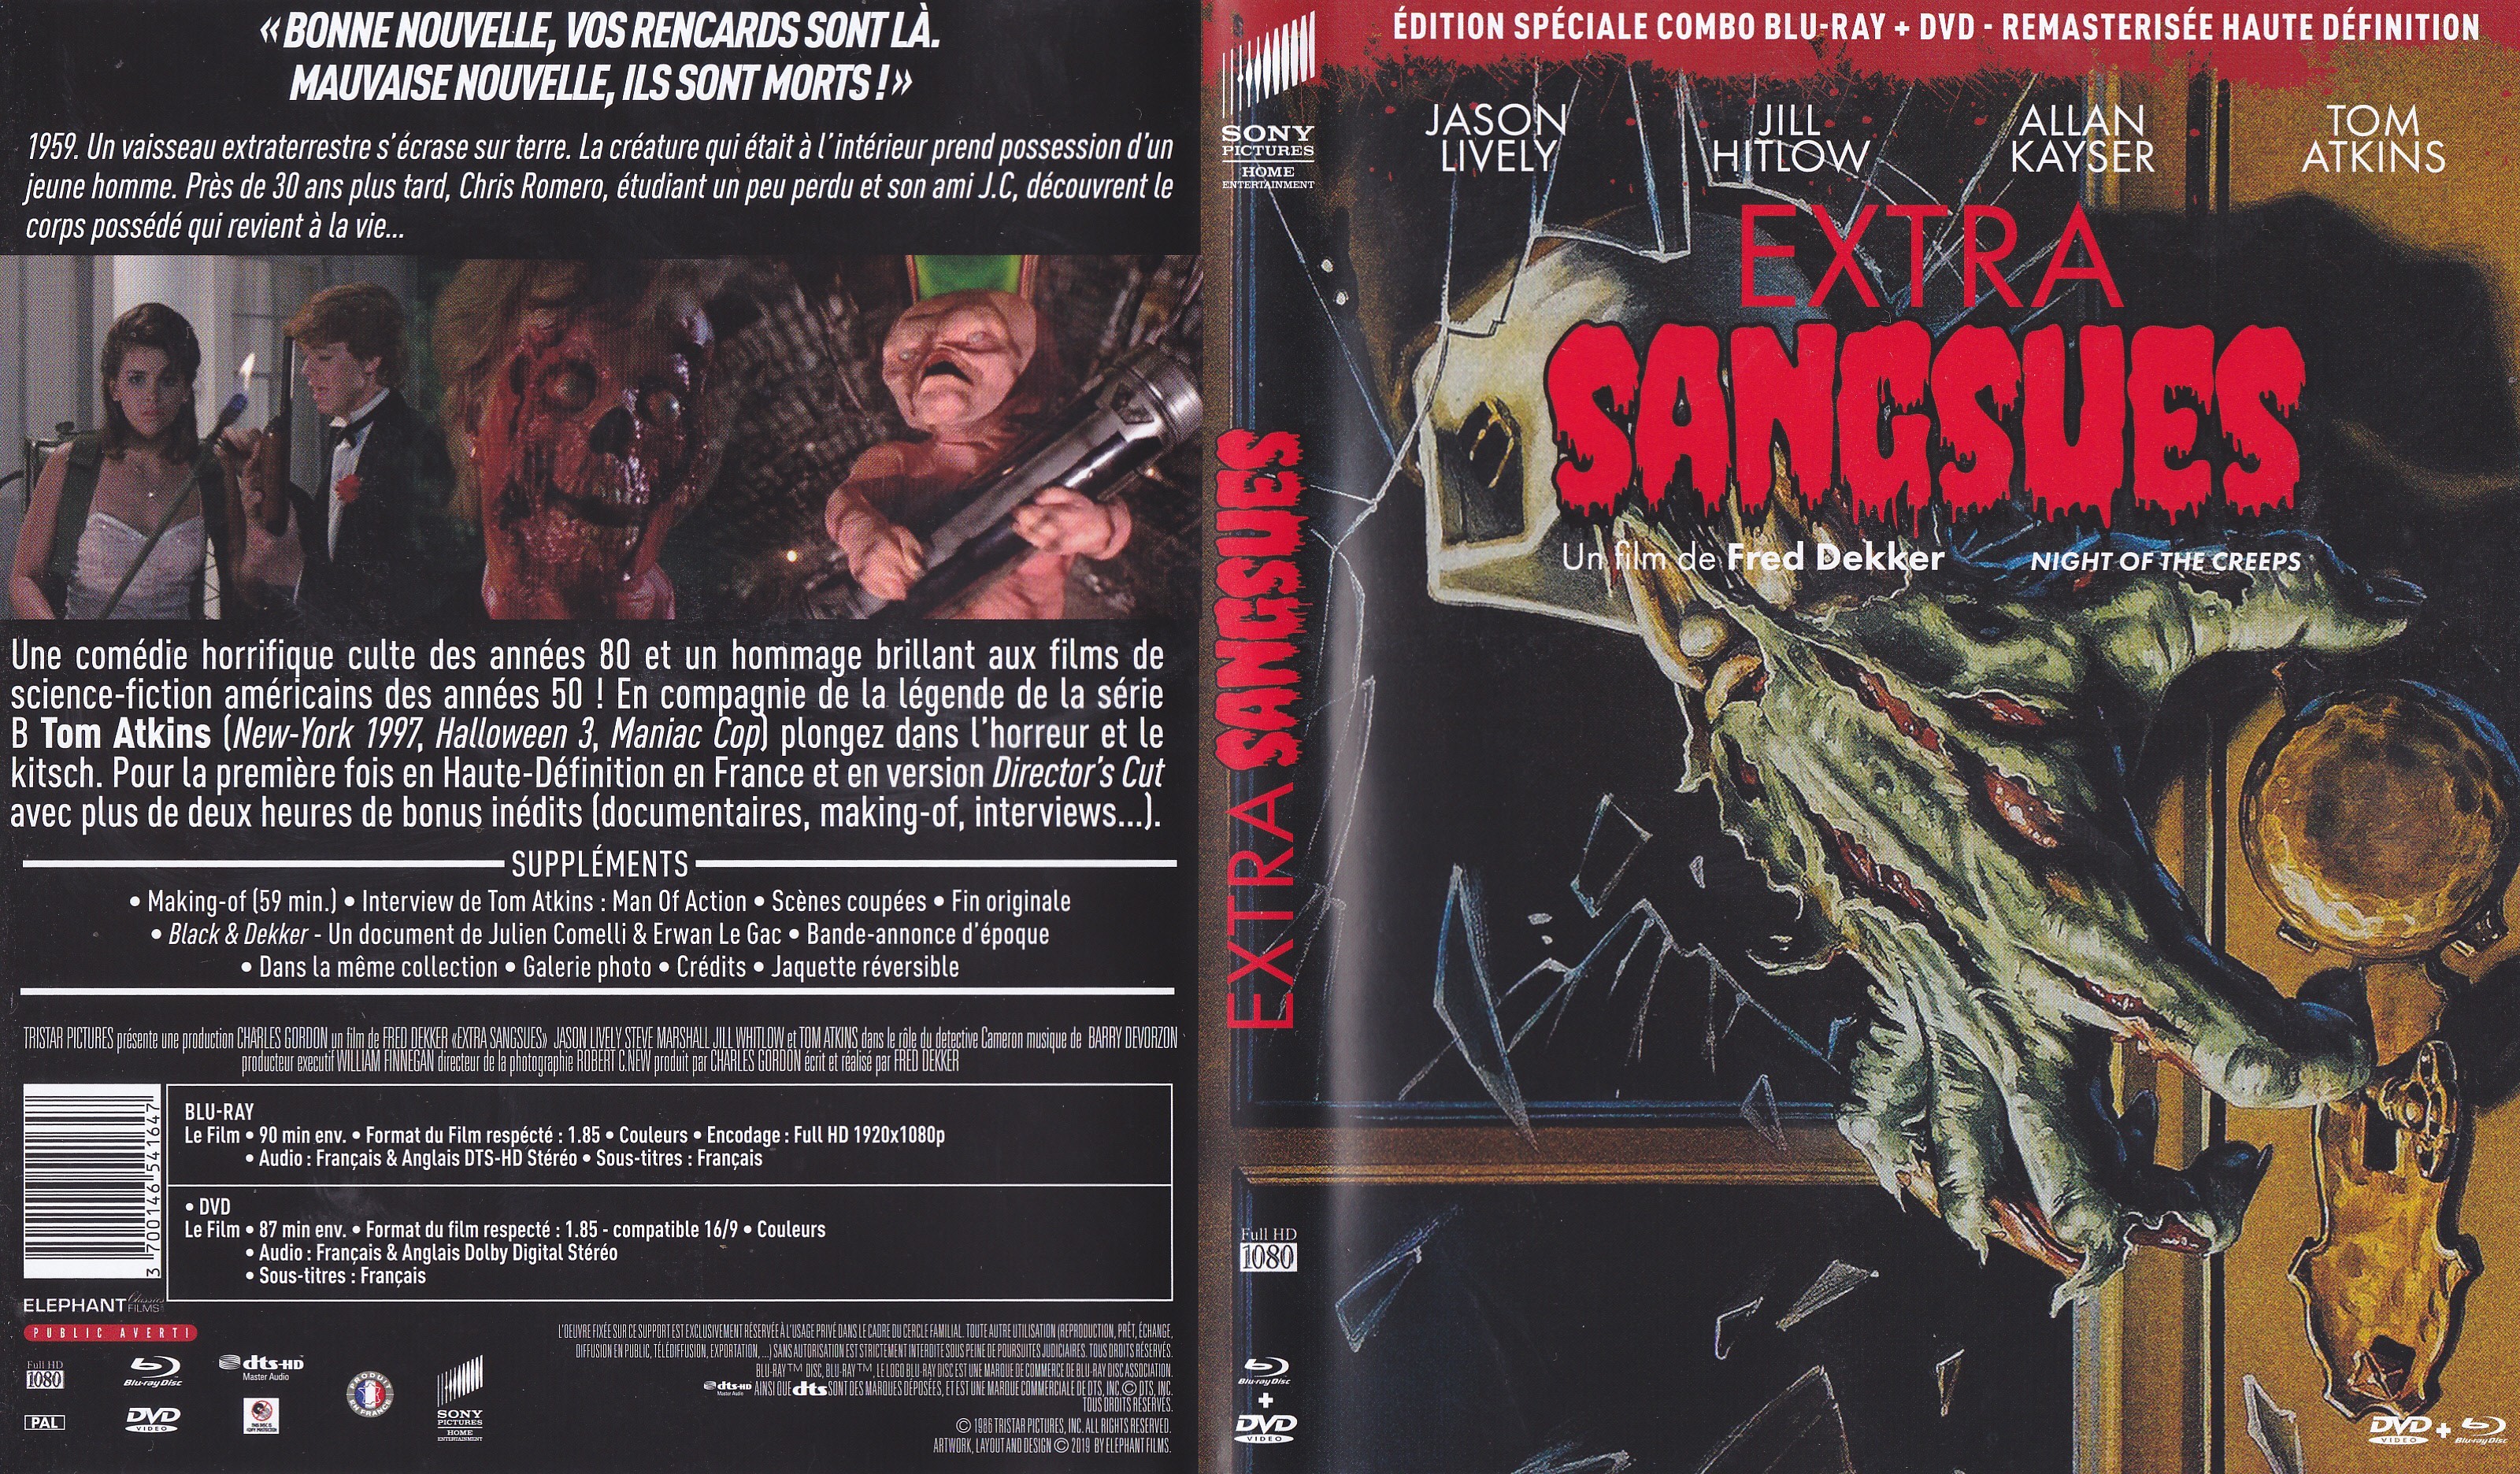 Jaquette DVD Extra sangsues (BLU-RAY)